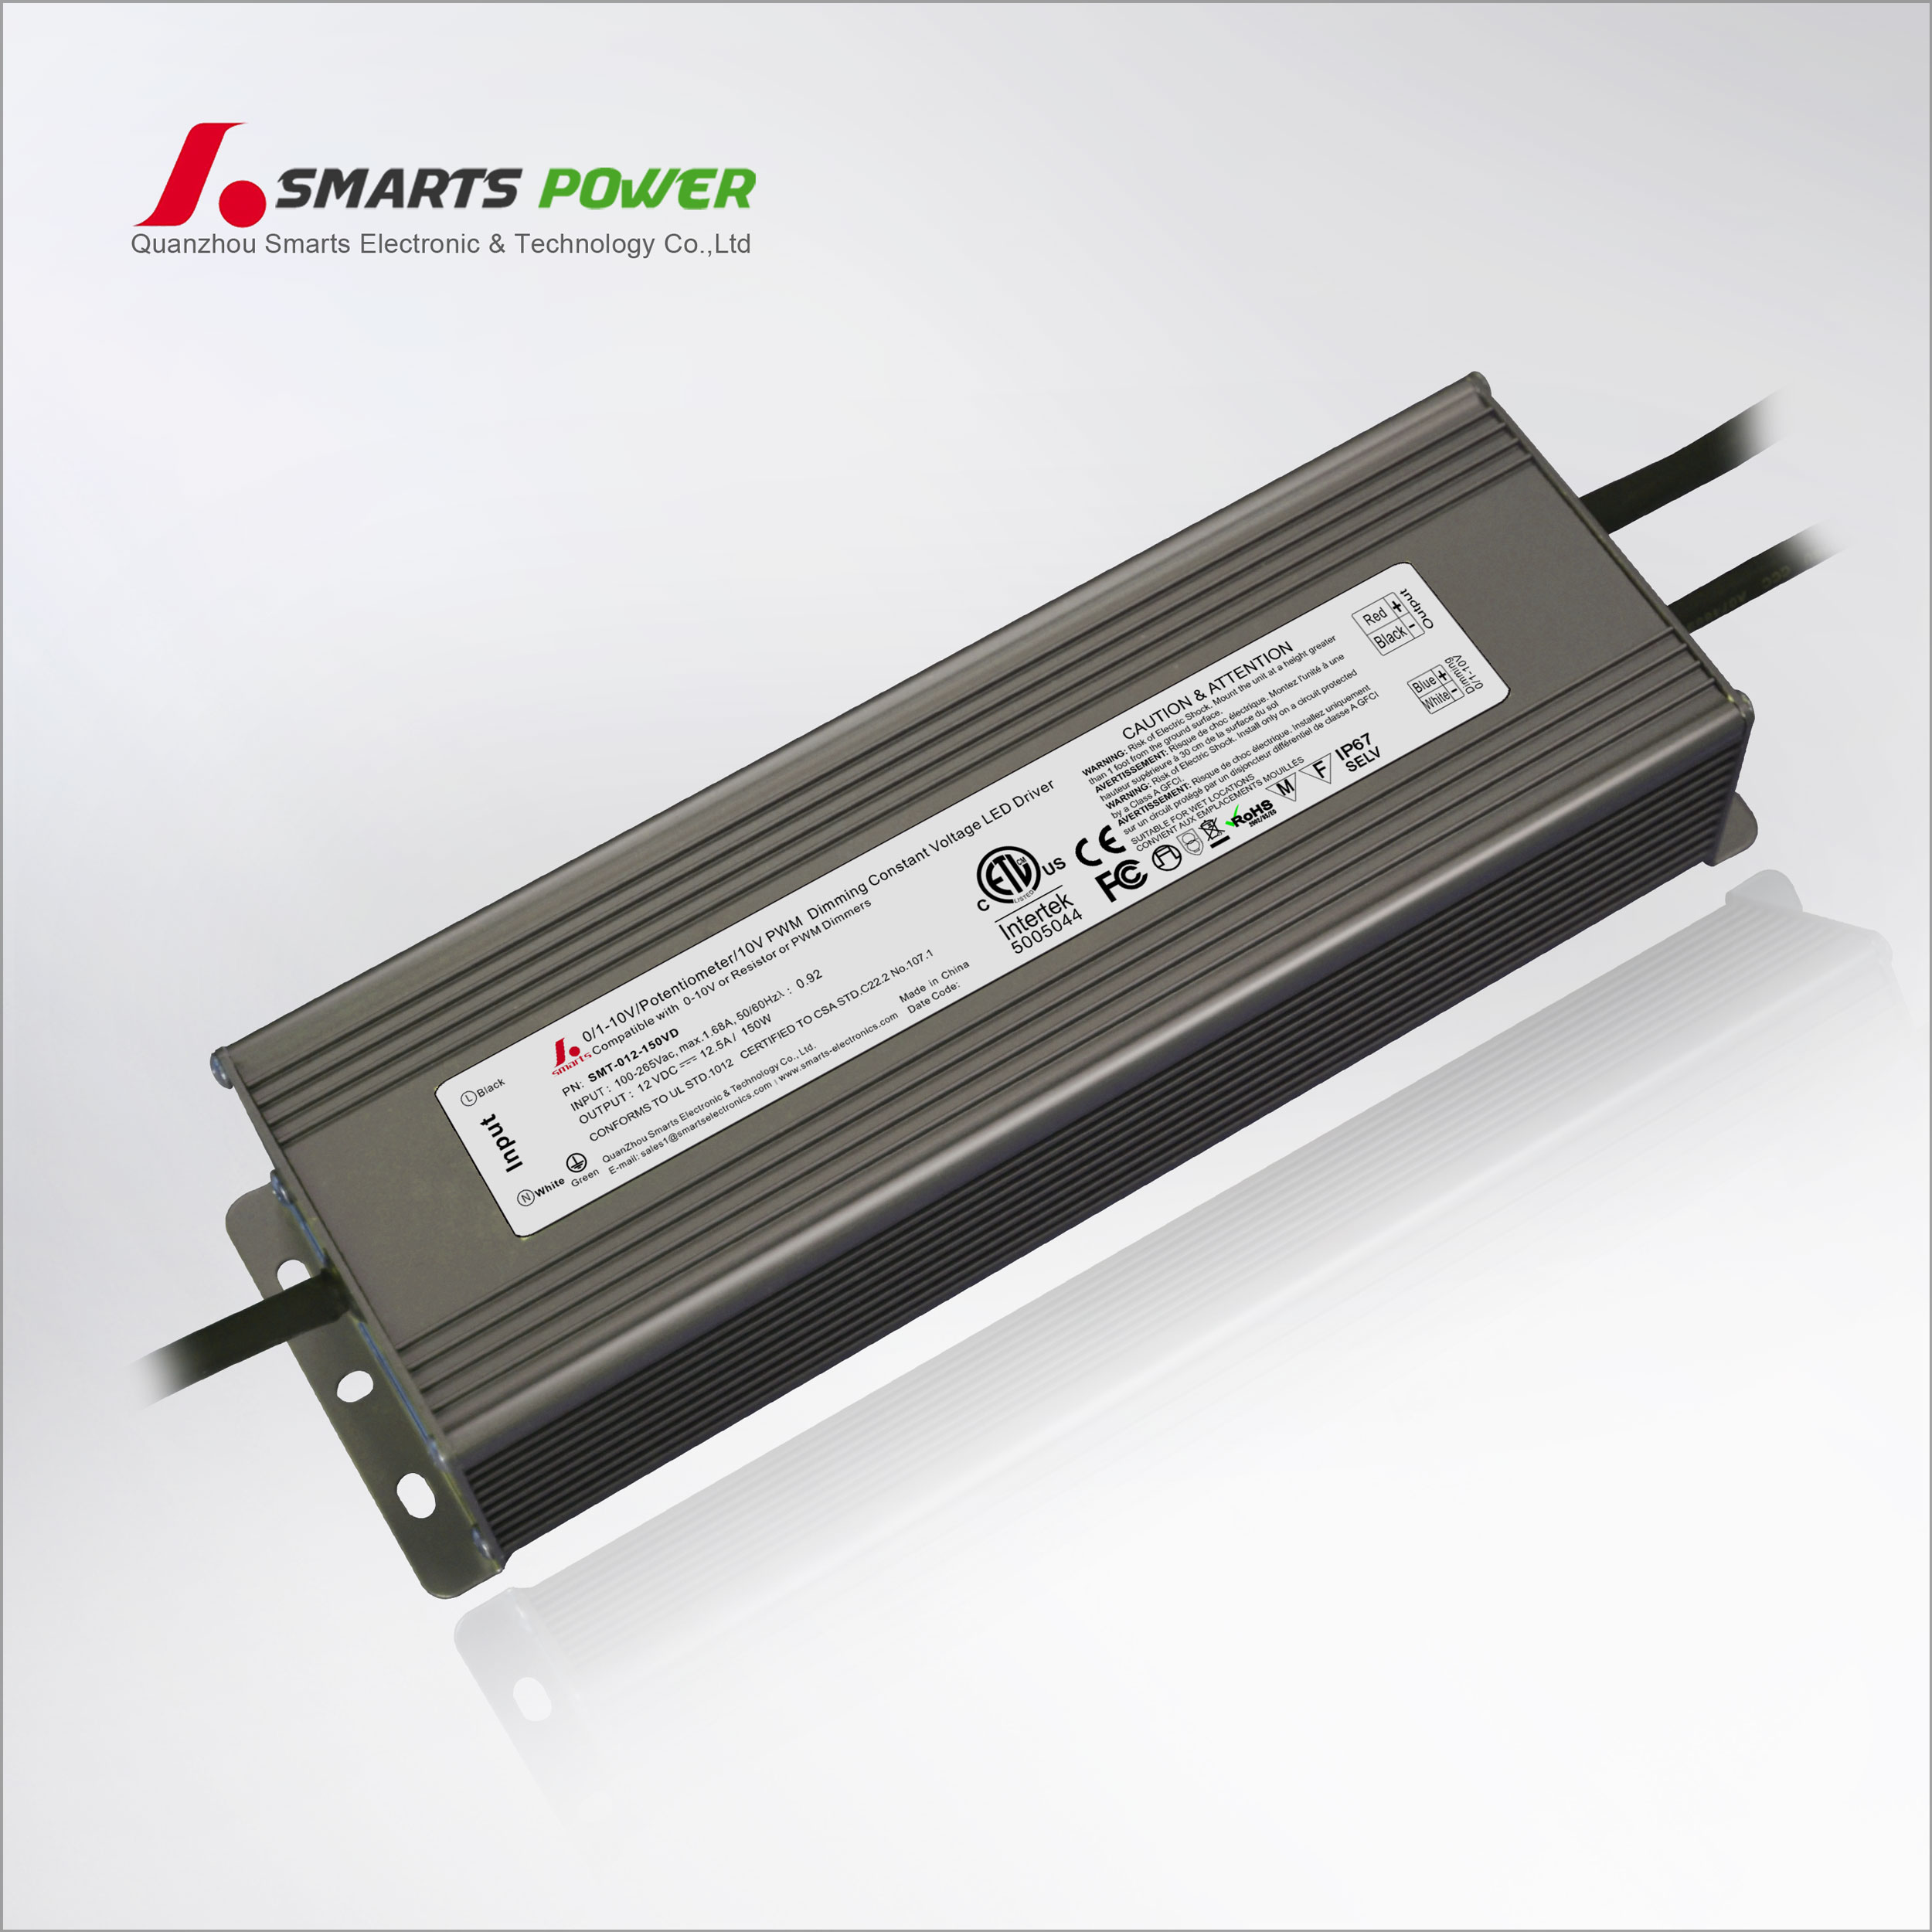 0-10V Dimmable LED Driver